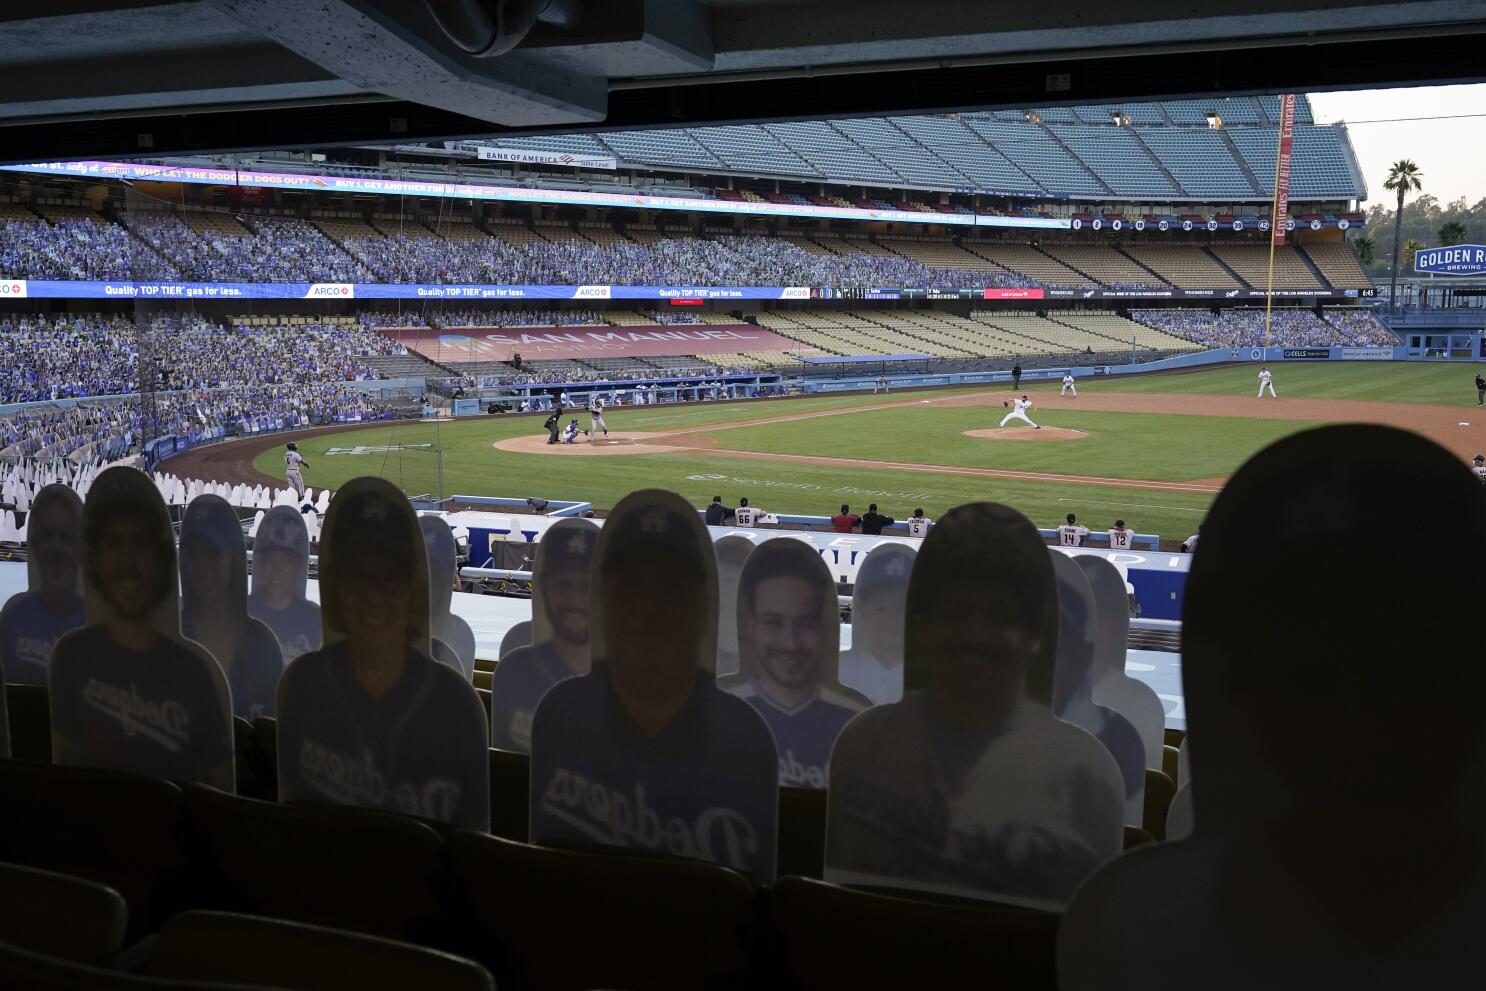 Dodger Stadium is my home': Fans share emotions about Opening Day